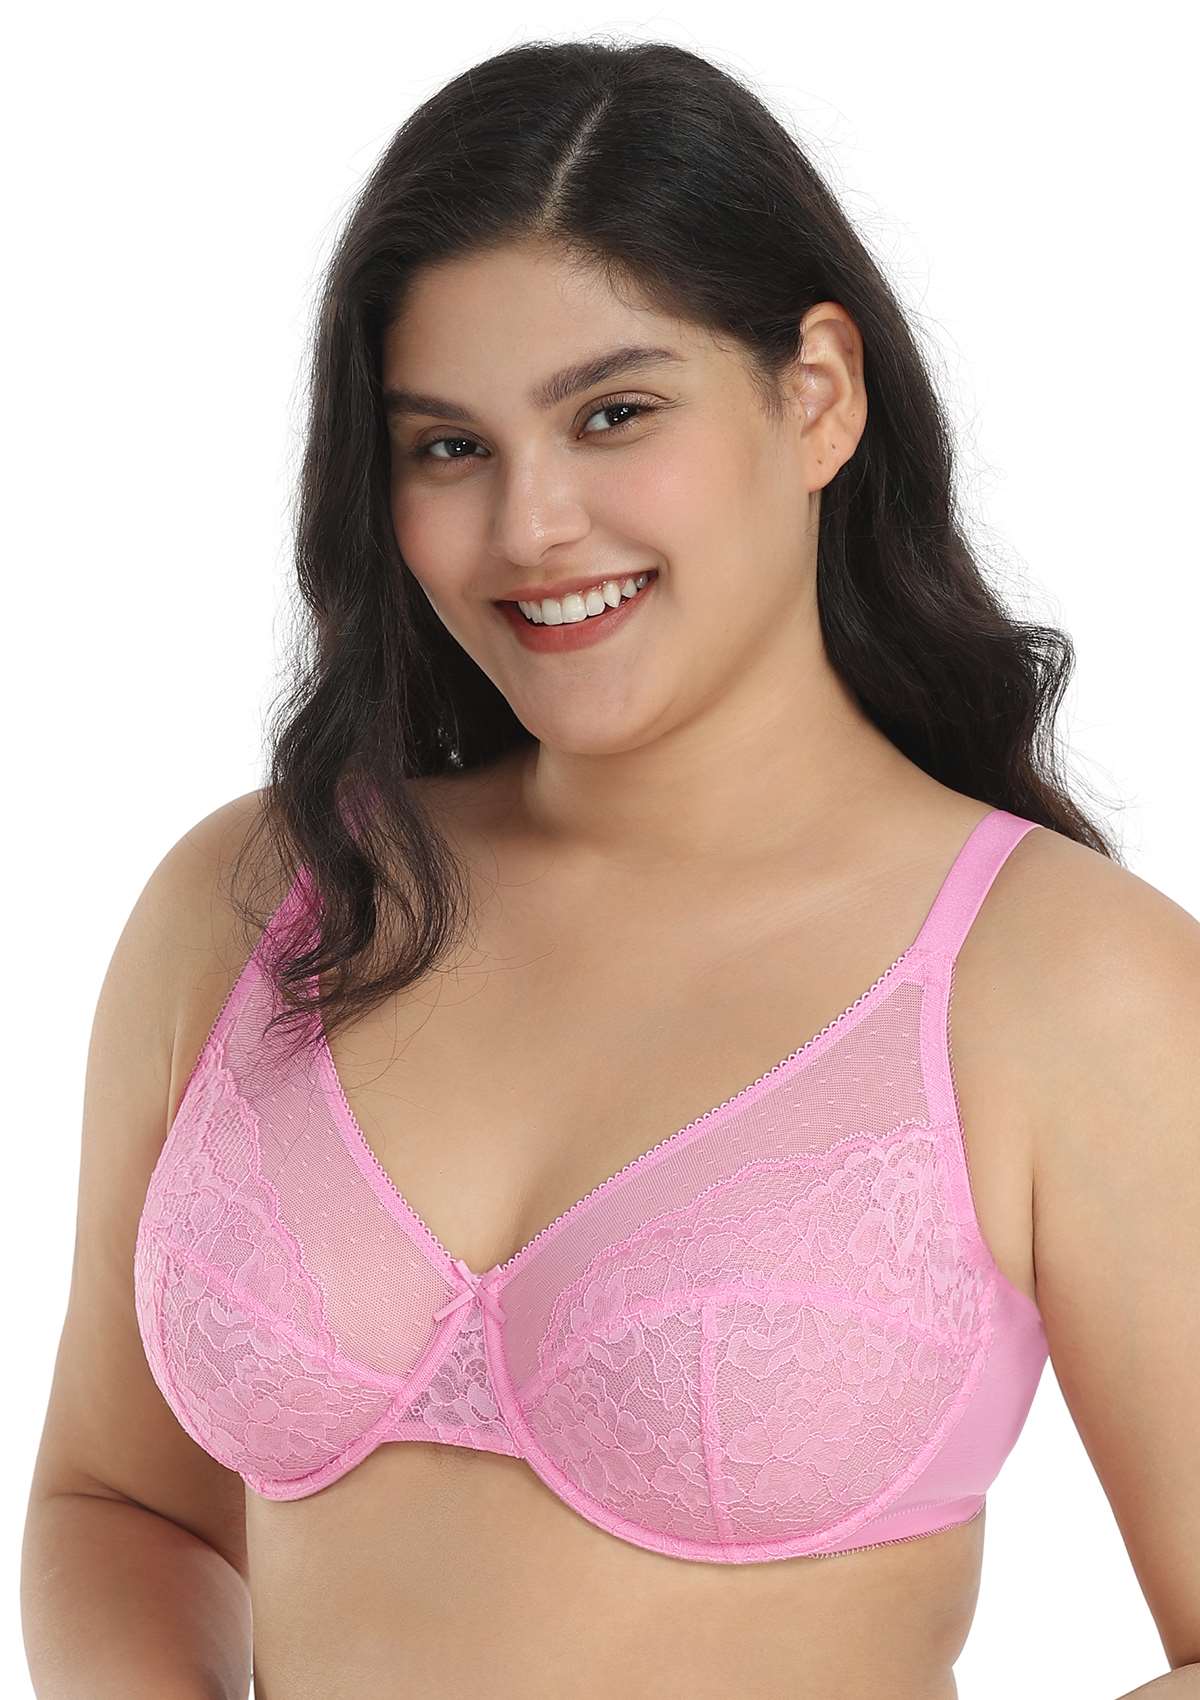 HSIA Enchante Lacy Bra: Comfy Sheer Lace Bra With Lift - Dusty Peach / 44 / G